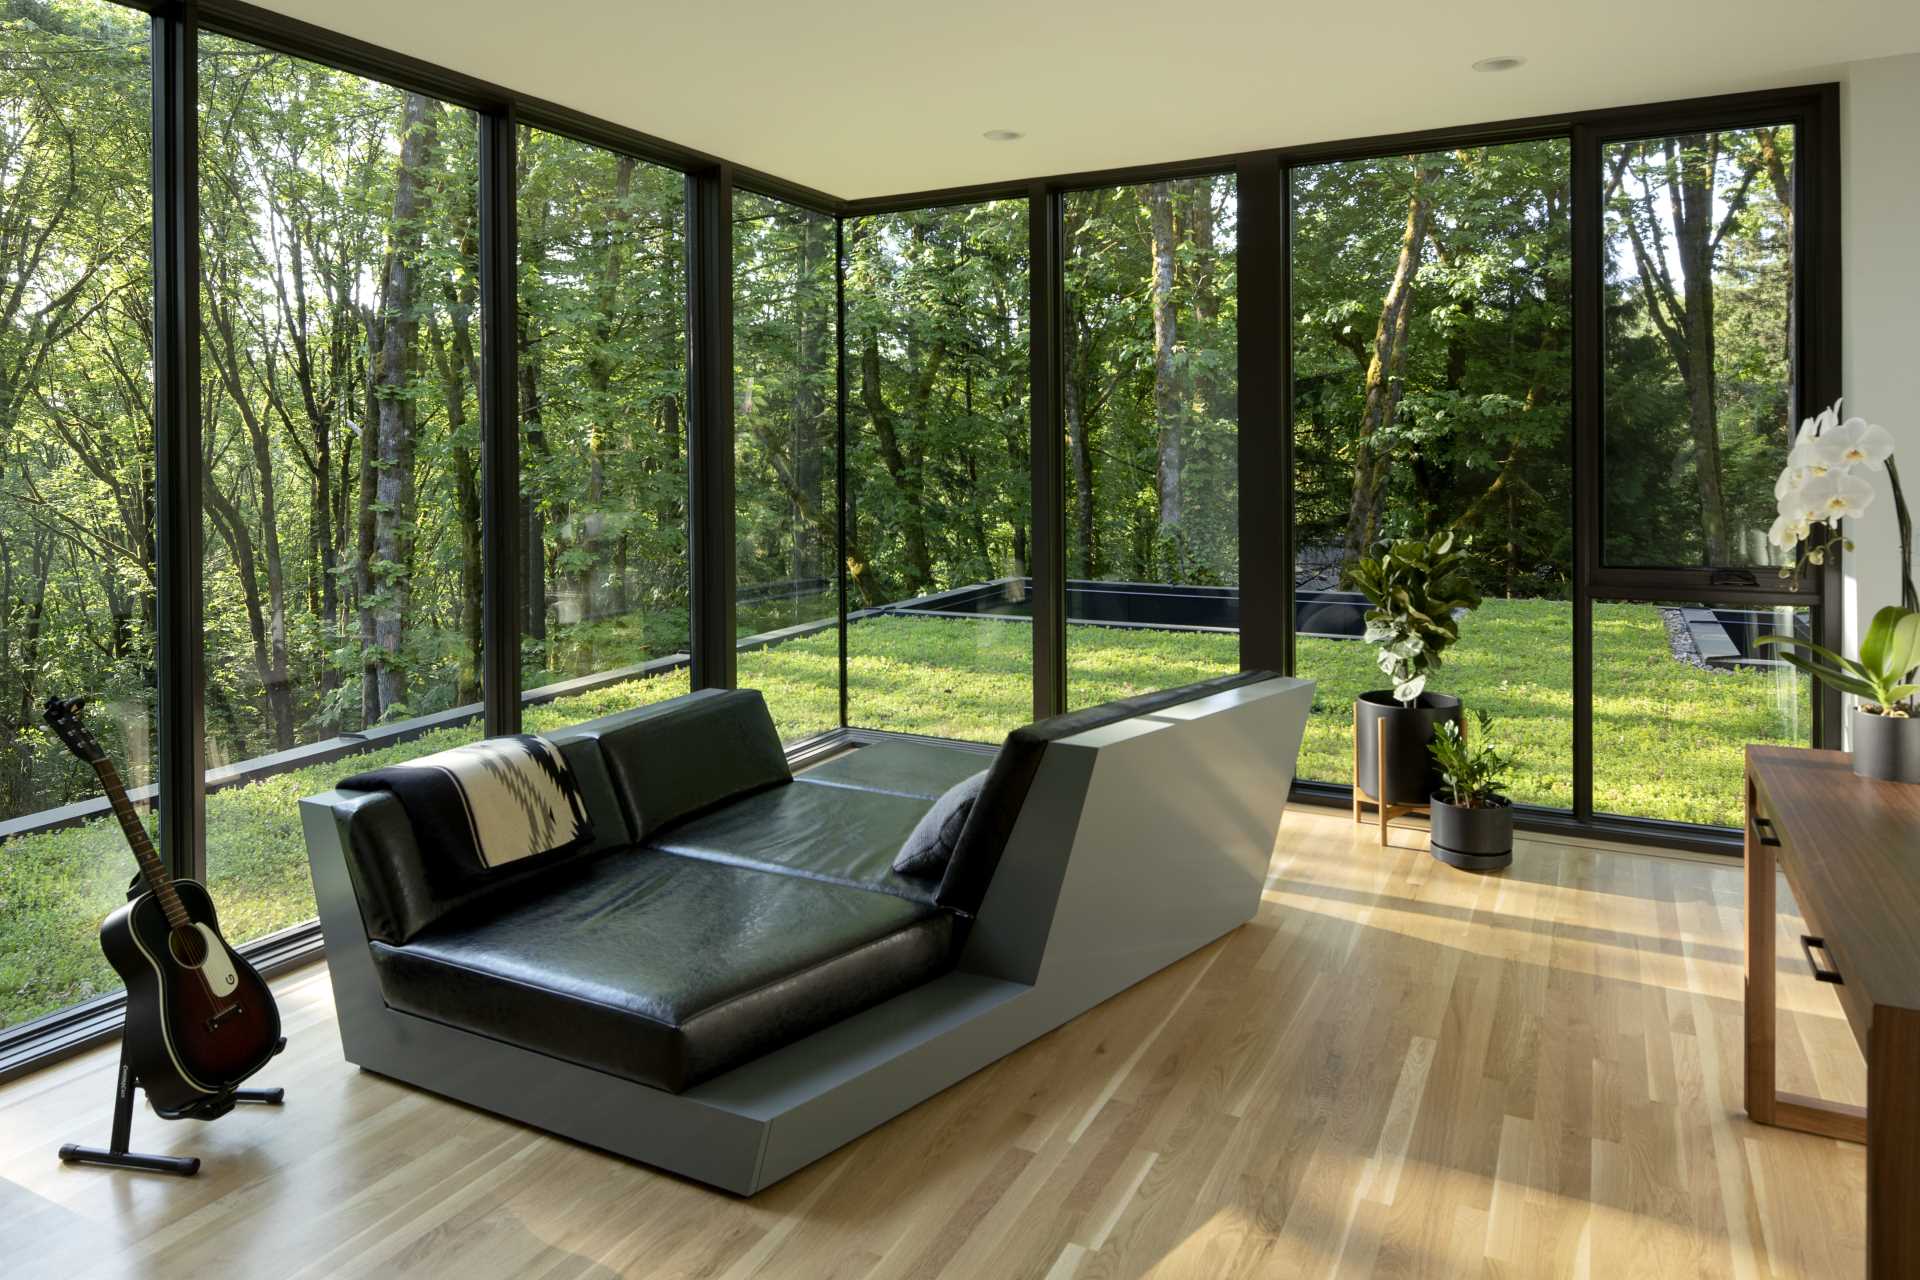 A modern sitting room with floor-to-ceiling windows that look out to a green roof and forest.